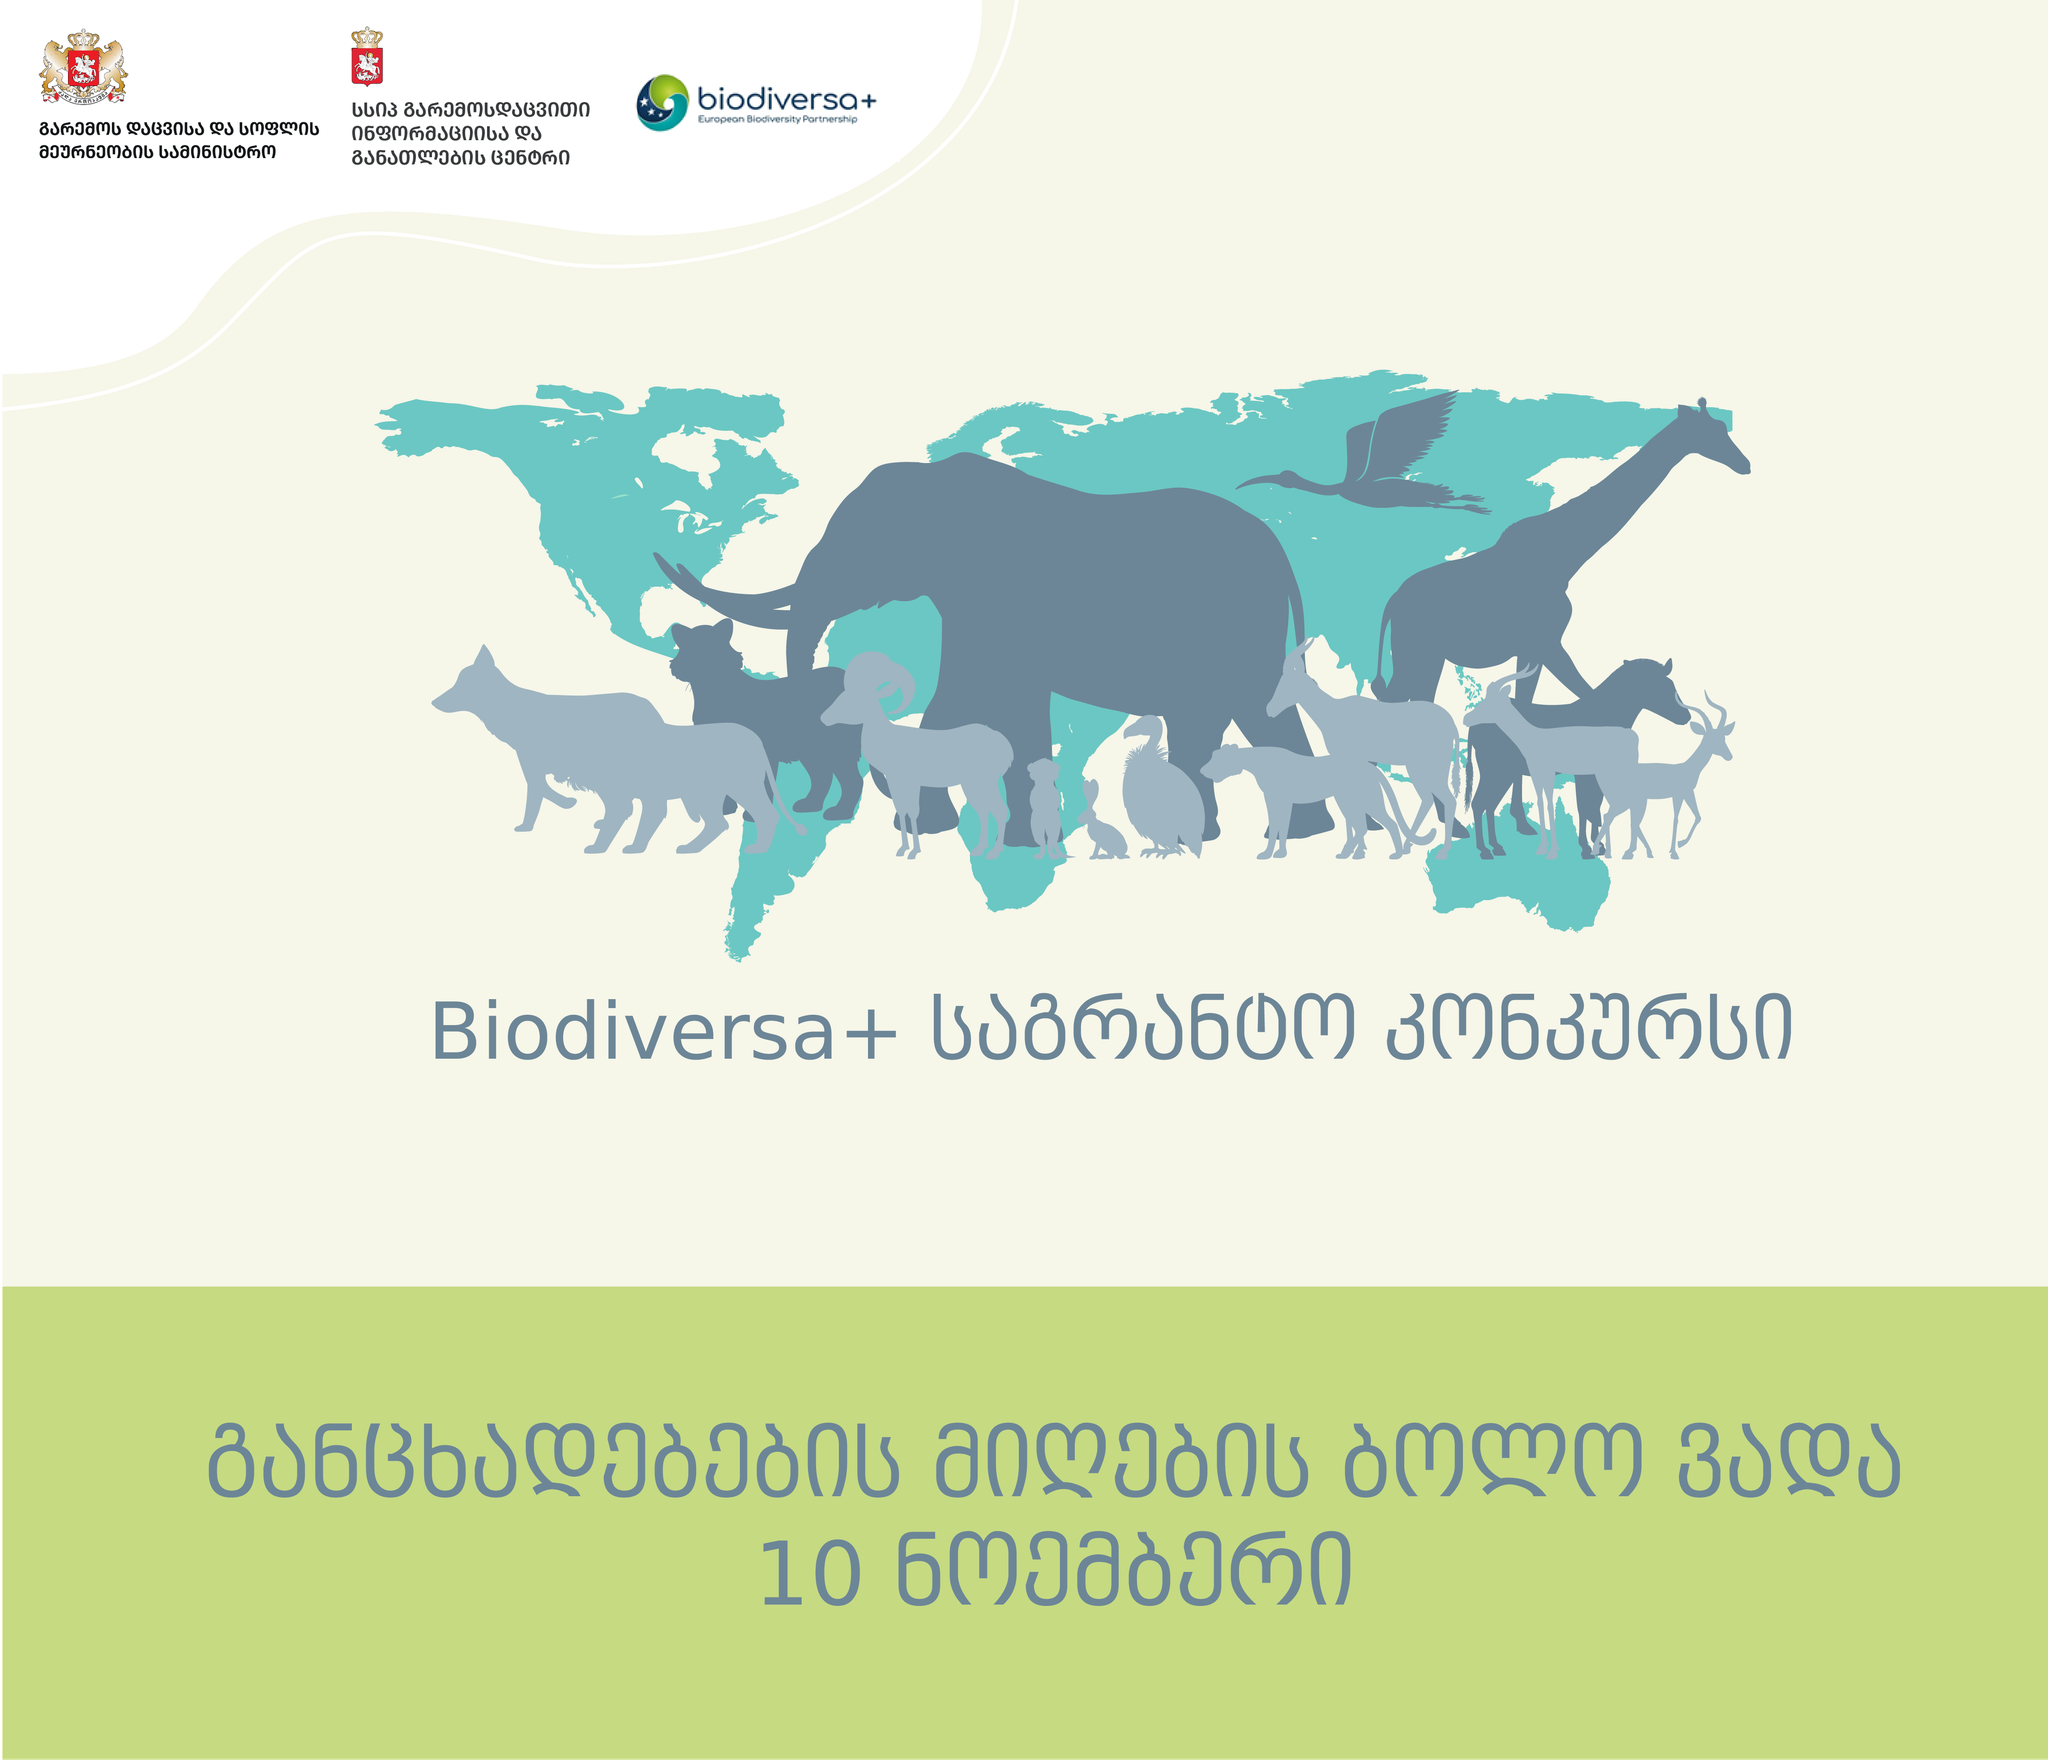 The grant contest of the European Biodiversity Partnership (BIODIVERSA+) ‘’ Nature-based solutions (NBS) for biodiversity, human well-being, and transformative changes’’ calls for applications